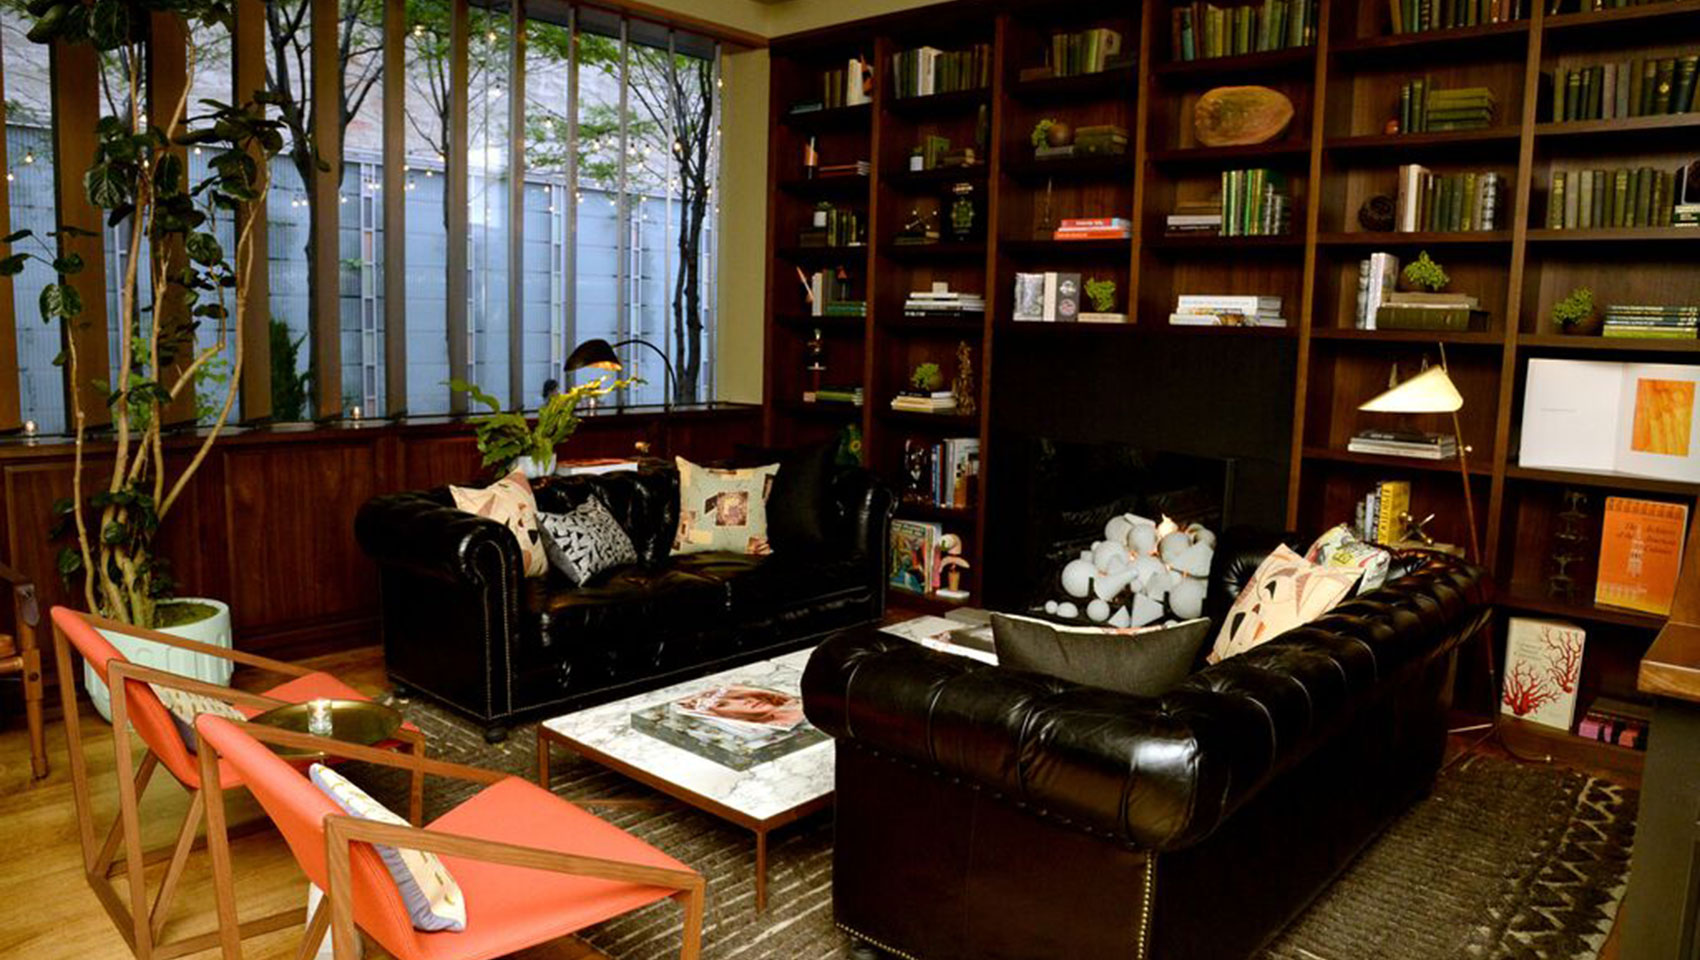 The Vine lounge seating with leather couches, marble coffee table, and shelves with books and accent pieces